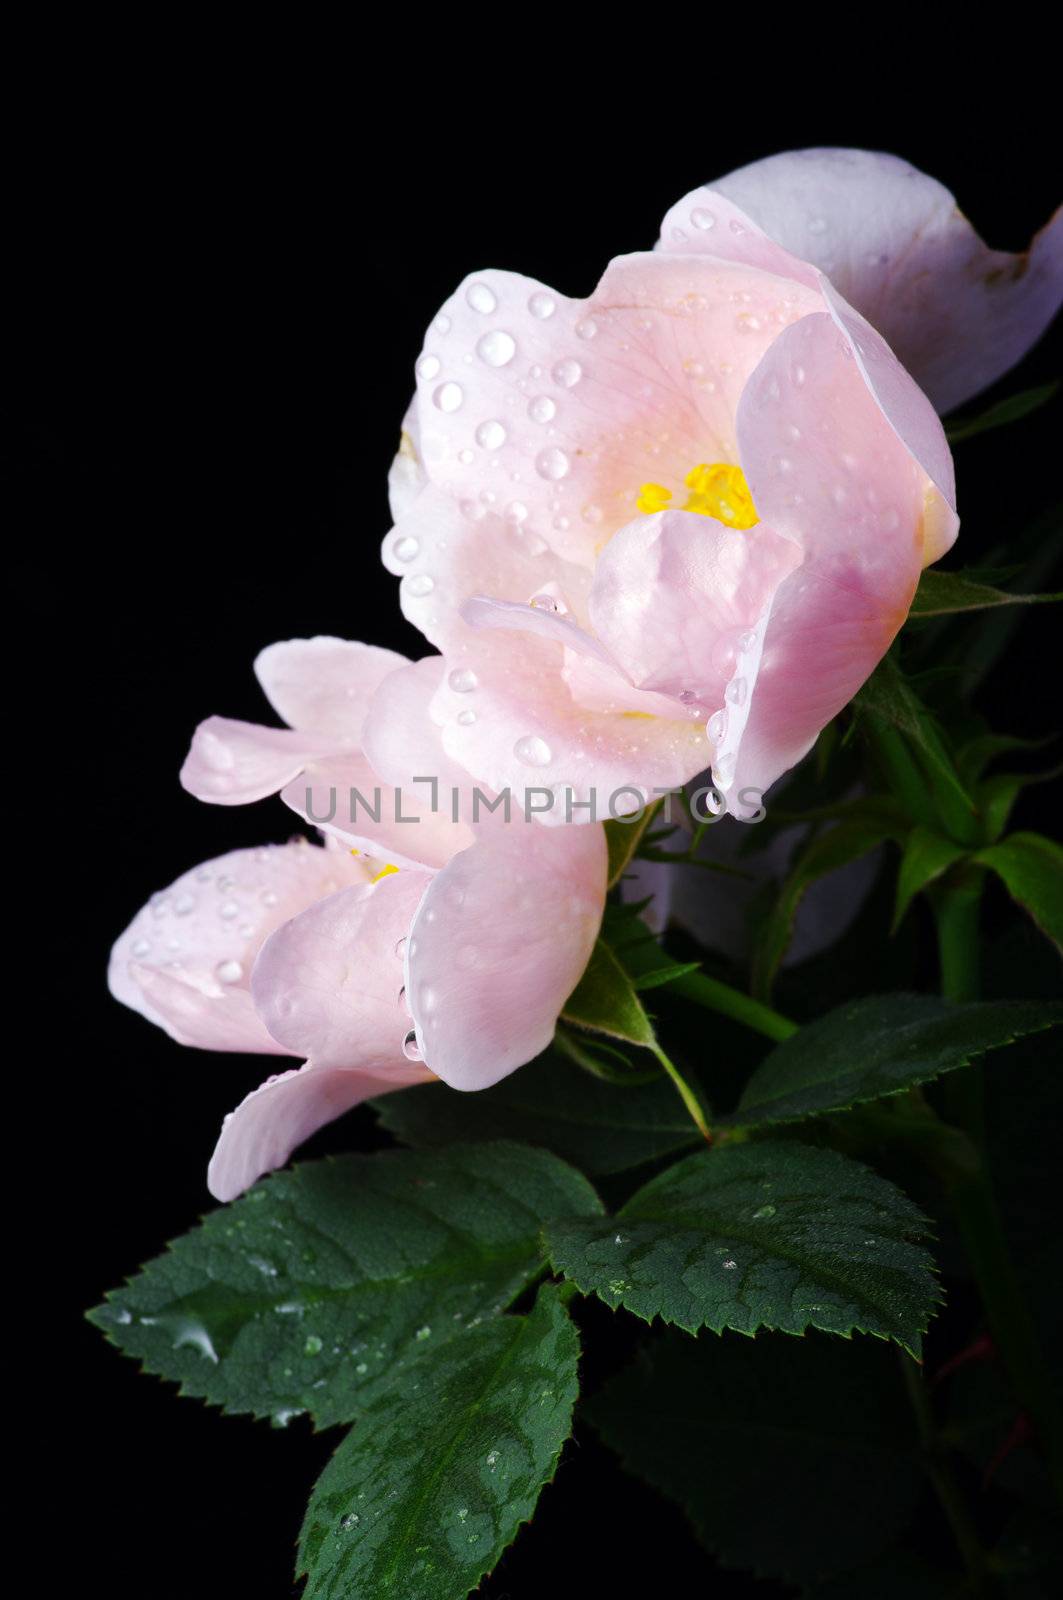 pink flowers of a dog-rose with water dorps on black background

